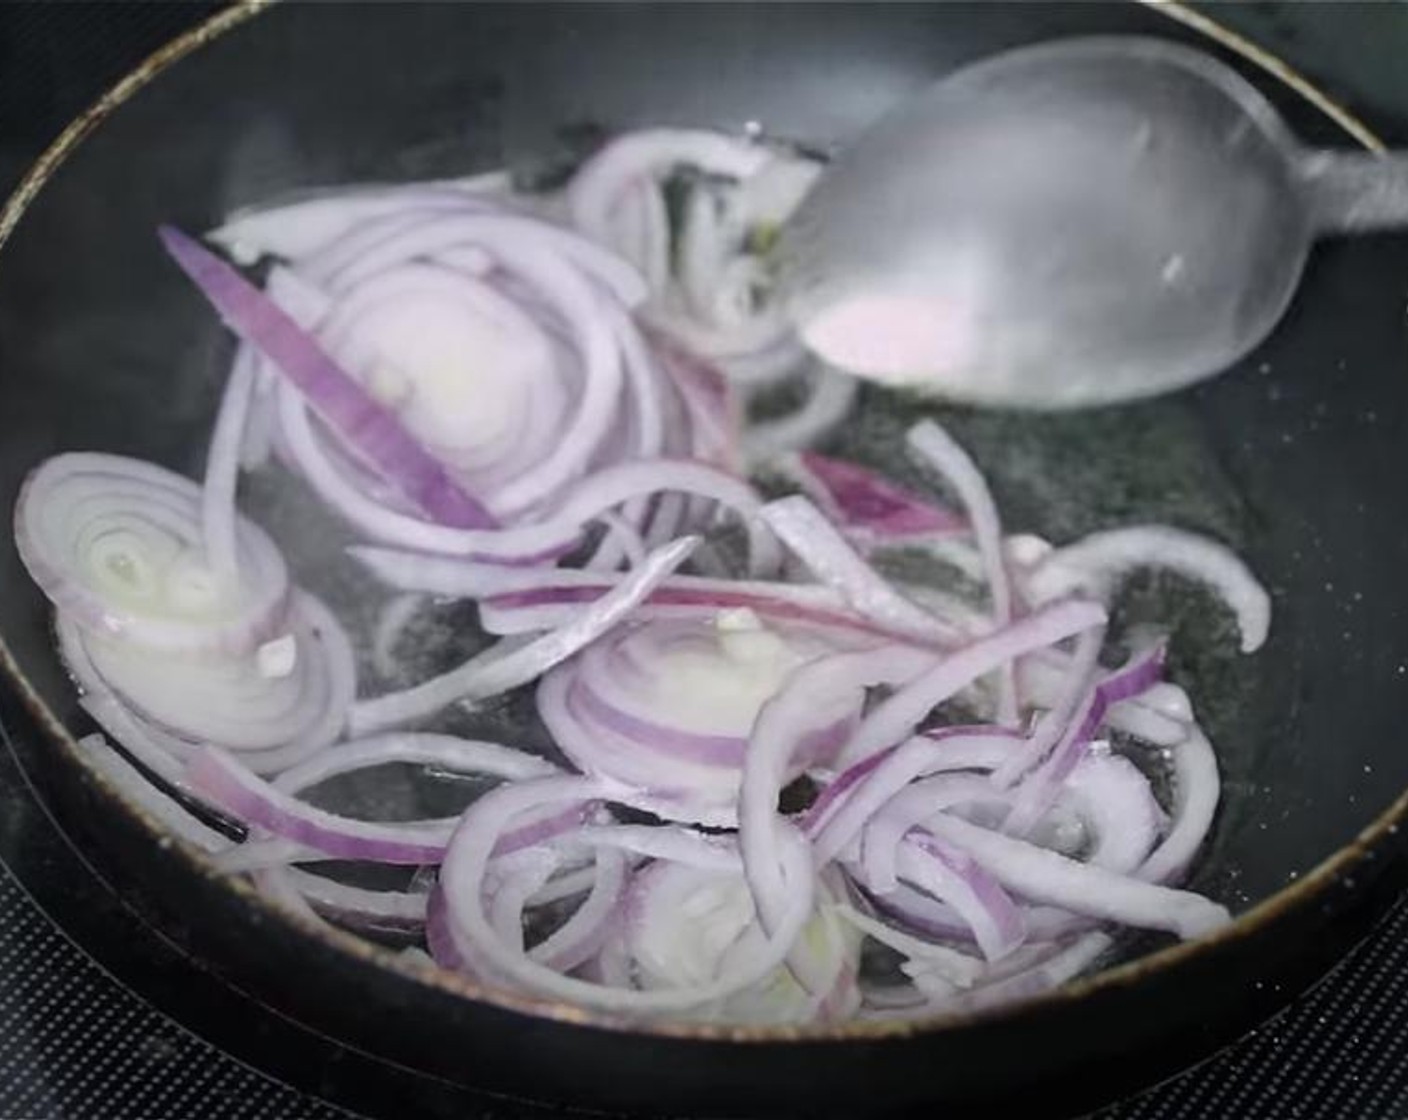 step 6 To fry the onion, in a skillet over medium high heat, add Cooking Oil (1/2 cup) and let it get warm, add sliced Red Onion (1), Distilled White Vinegar (1 Tbsp) and Salt (1/4 tsp), stir and cook for 2 to 3 minutes until it softens a little.